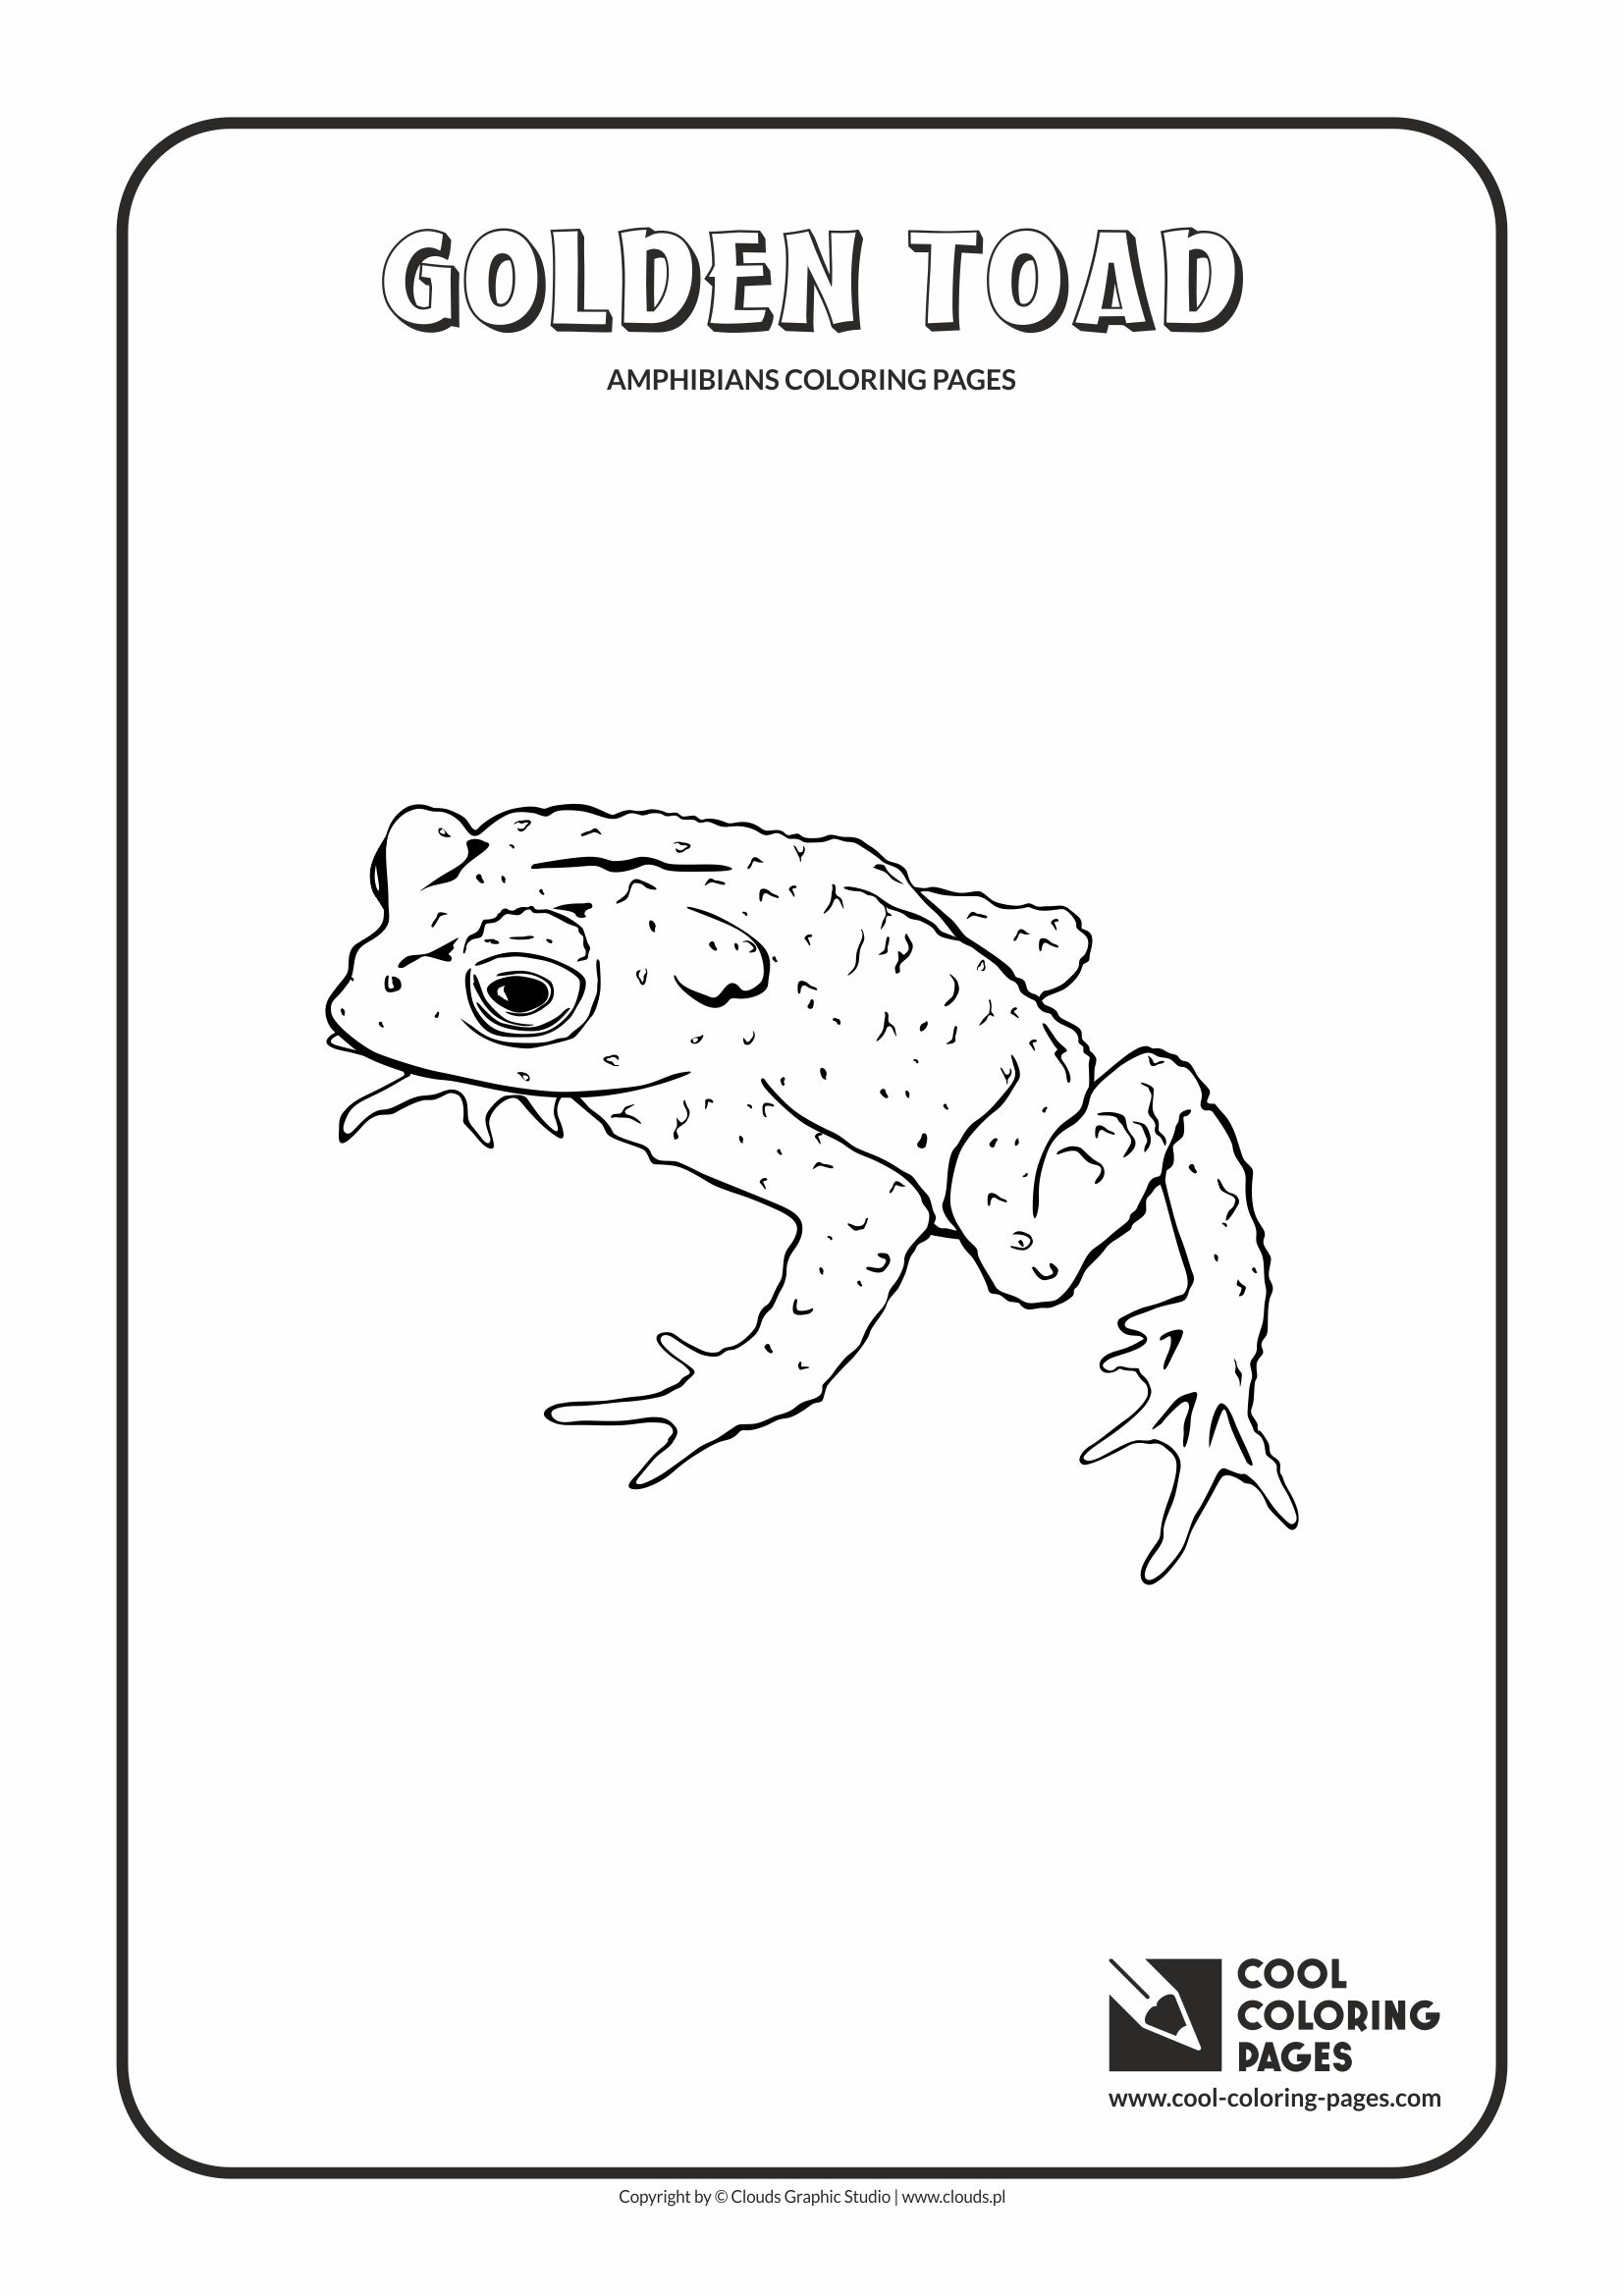 Cool Coloring Pages - Animals / Golden toad / Coloring page with golden toad